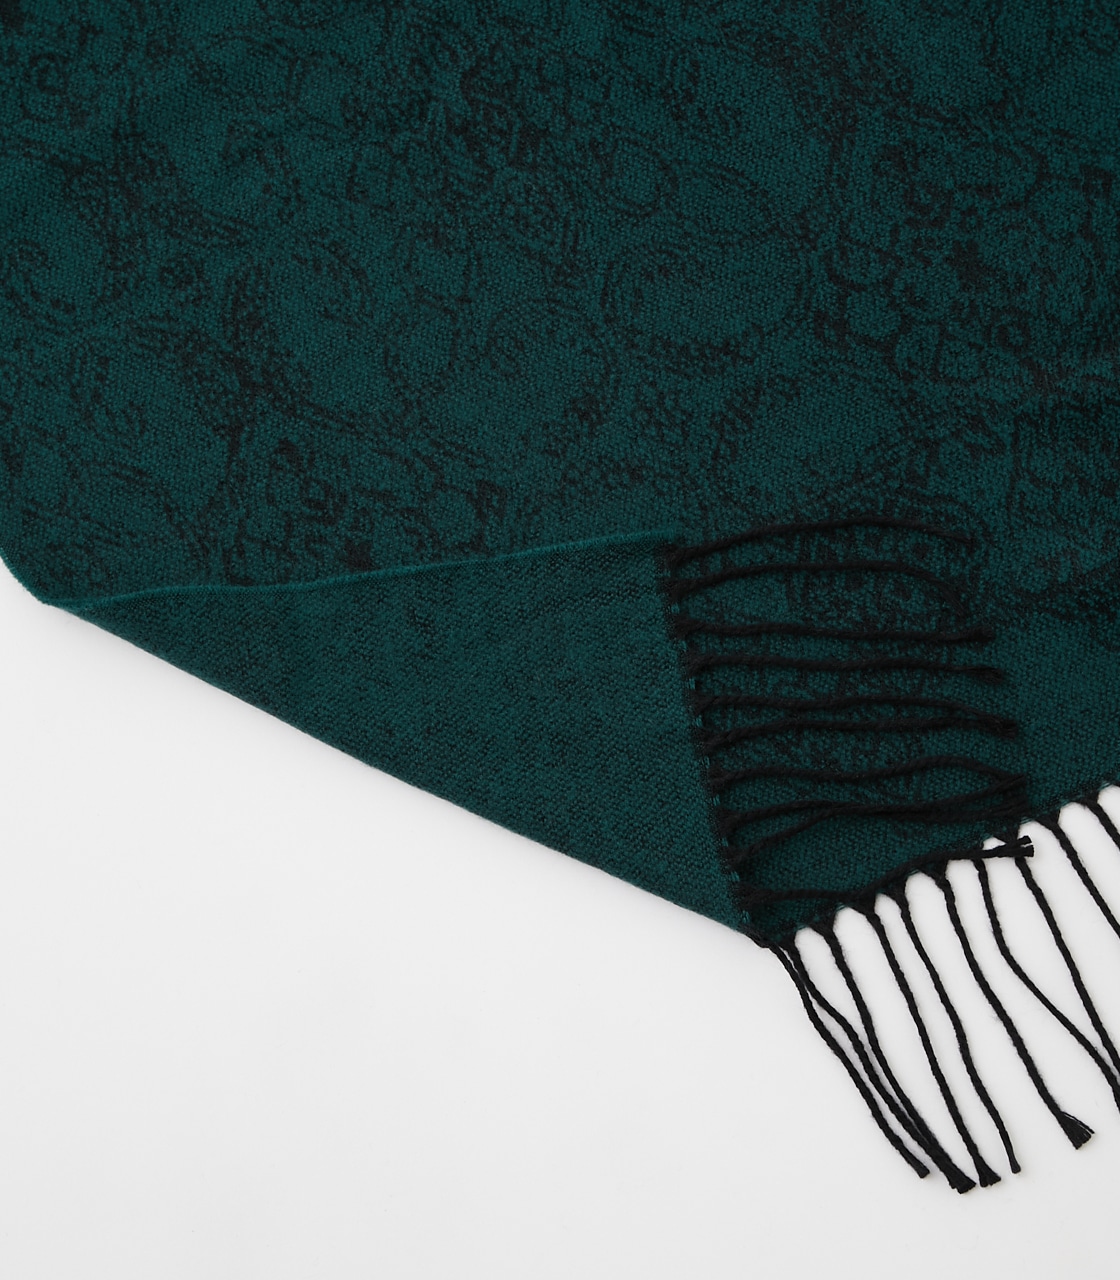 DAMASK JACQUARD STOLE/ダマスクジャガードストール 詳細画像 柄GRN 6